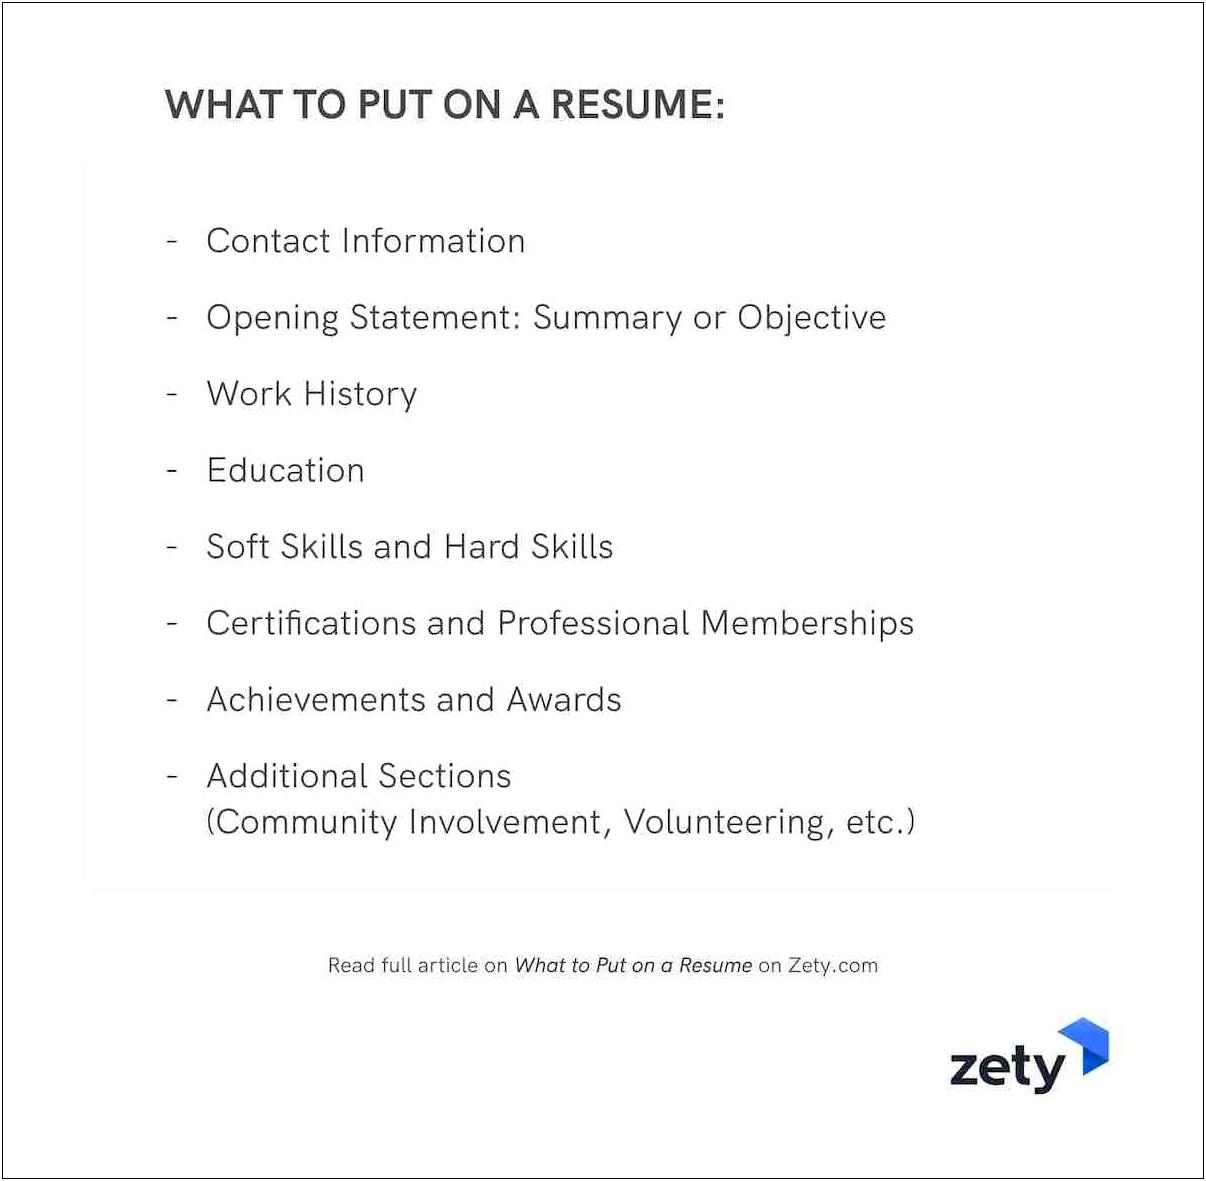 Things To Avoid Putting In A Resume